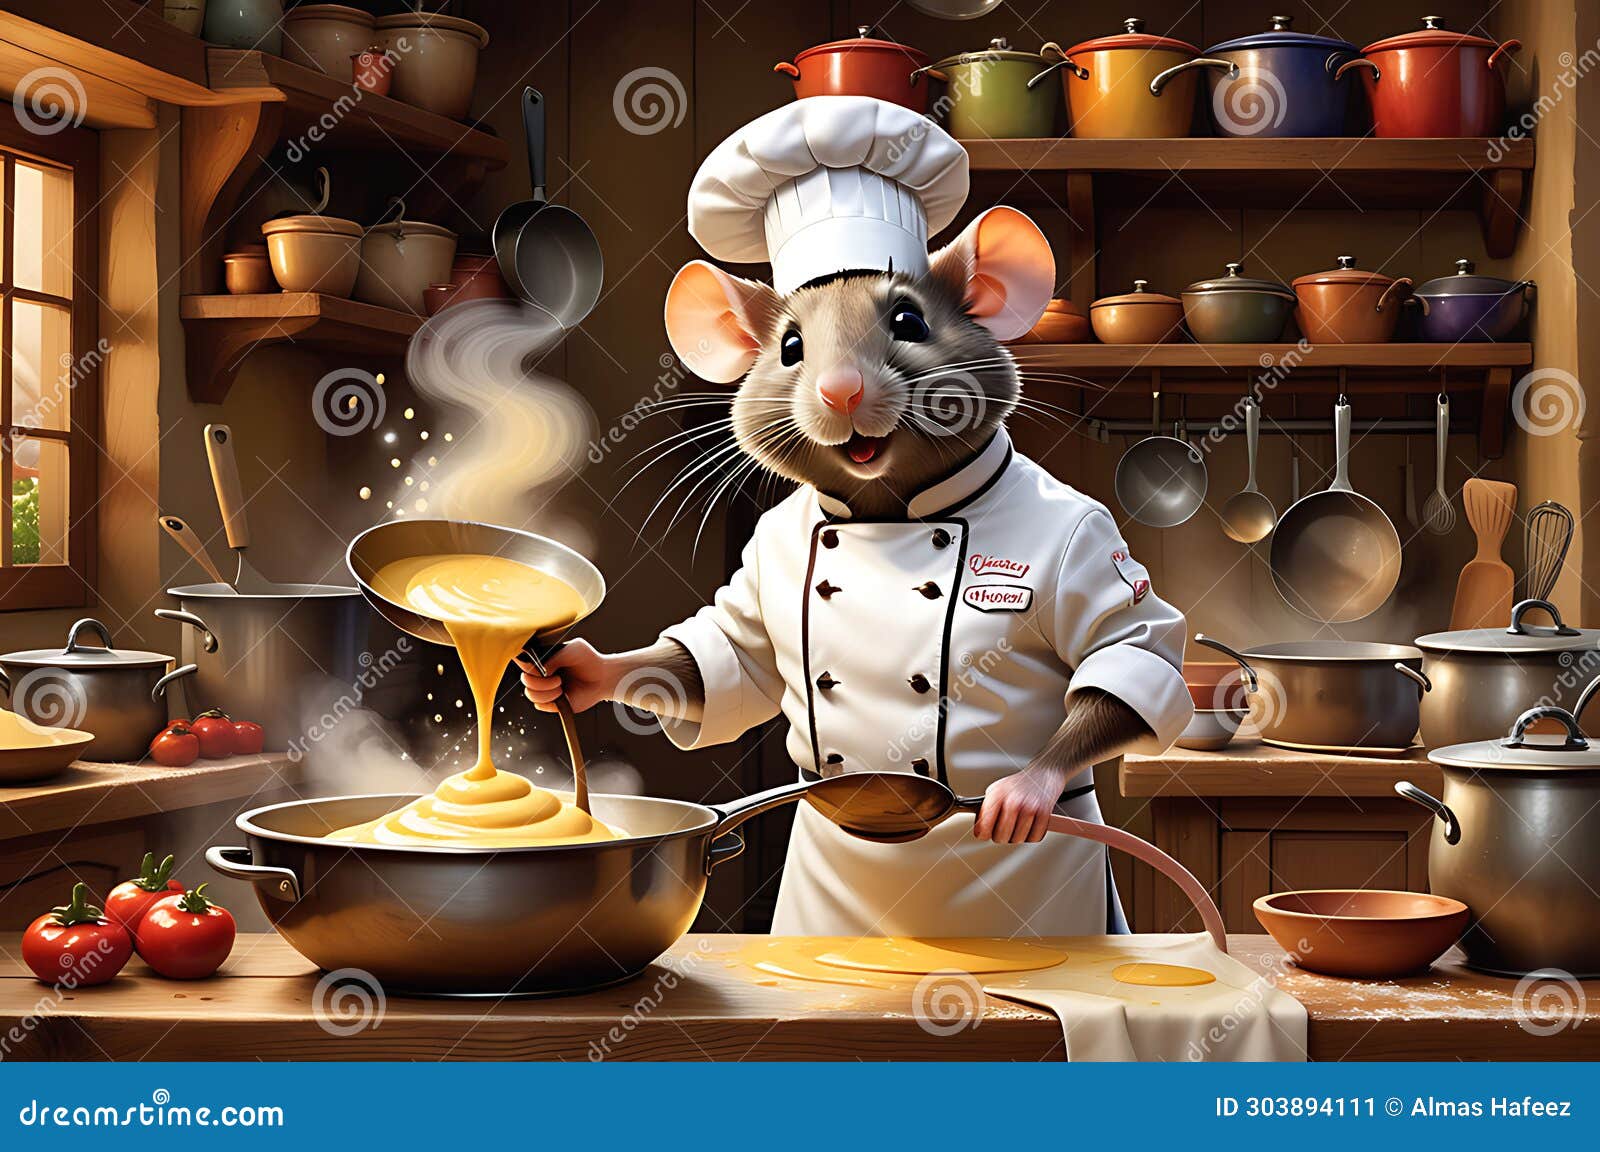 culinary maestro: rat dressed in a professional chef's uniform whisking a bowl on a wooden kitchen bench